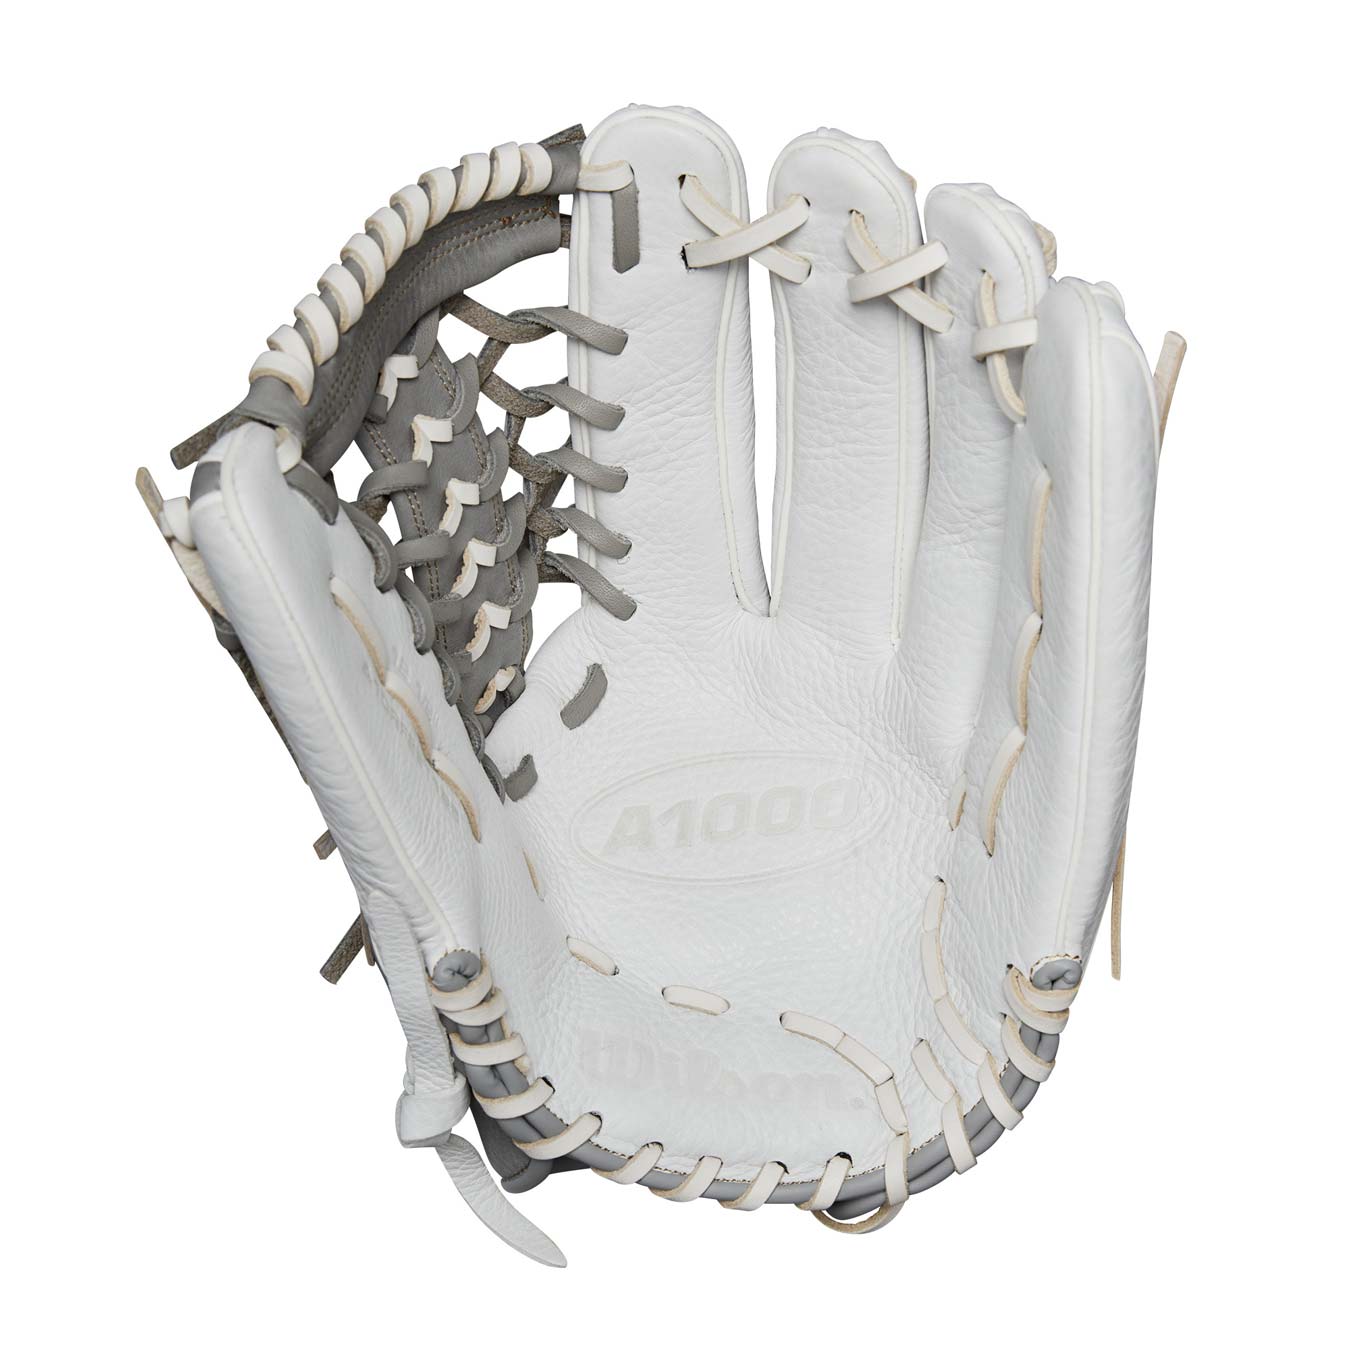 Wilson A1000 Fastpitch T125 White/Silver/Black 12.5"